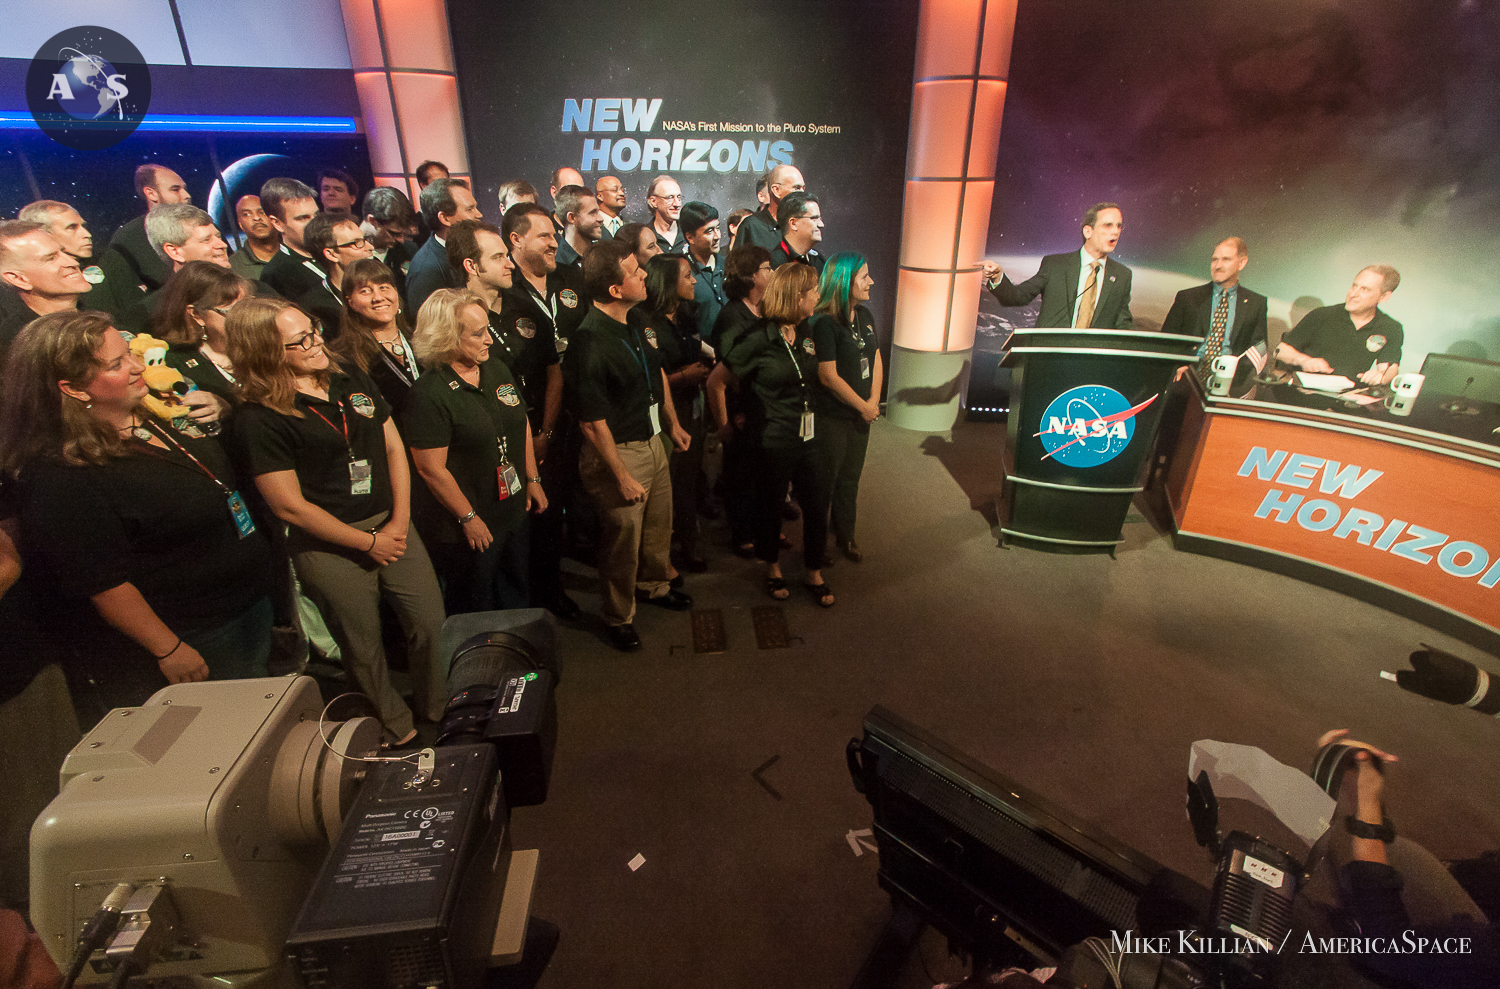 The New Horizons mission teams receives a standing ovation at the Johns Hopkins Applied Physics Laboratory auditorium after receiving confirmation from the spacecraft that it carried out its Pluto flyby successfully. Photo Credit: Mike Killian / AmericaSpace